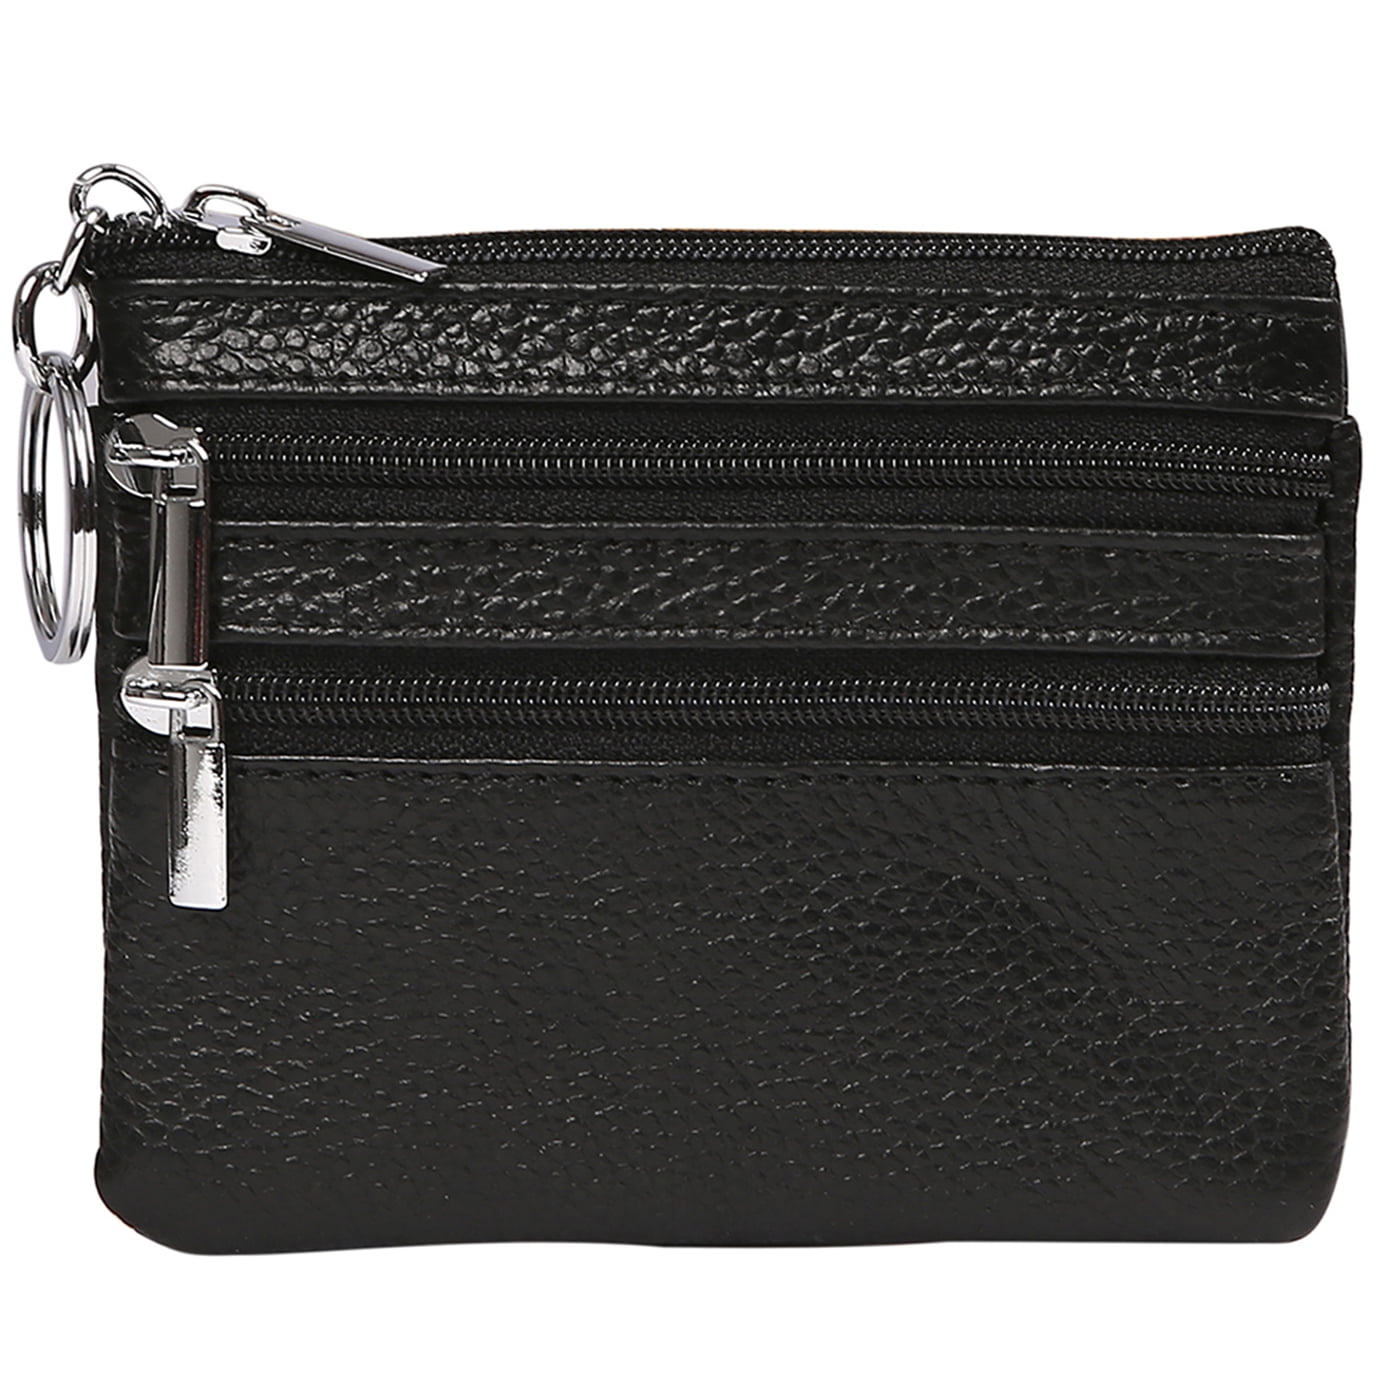 HDE Womens Leather Small Coin Purse Zipper Change Wallet Mini Pouch w/Key Ring (Black)